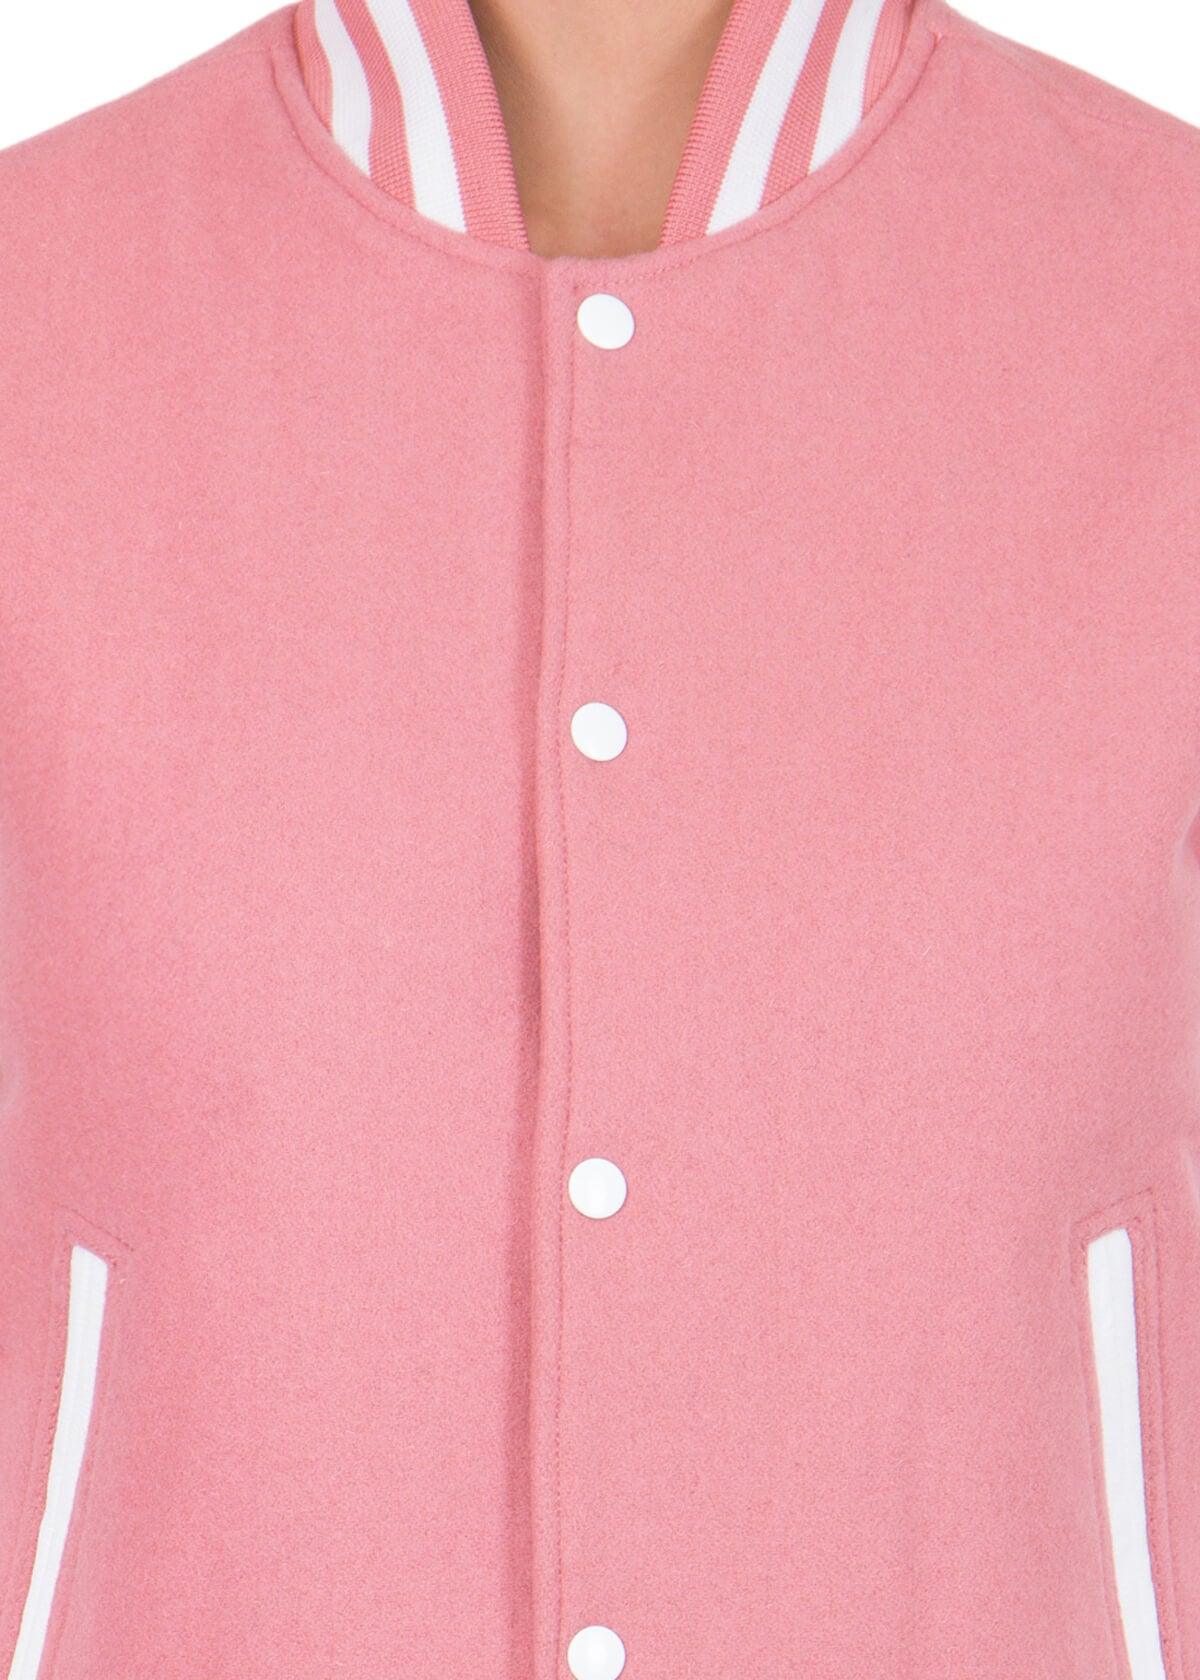 Pink Varsity Jacket Womens with White Leather Sleeves-6